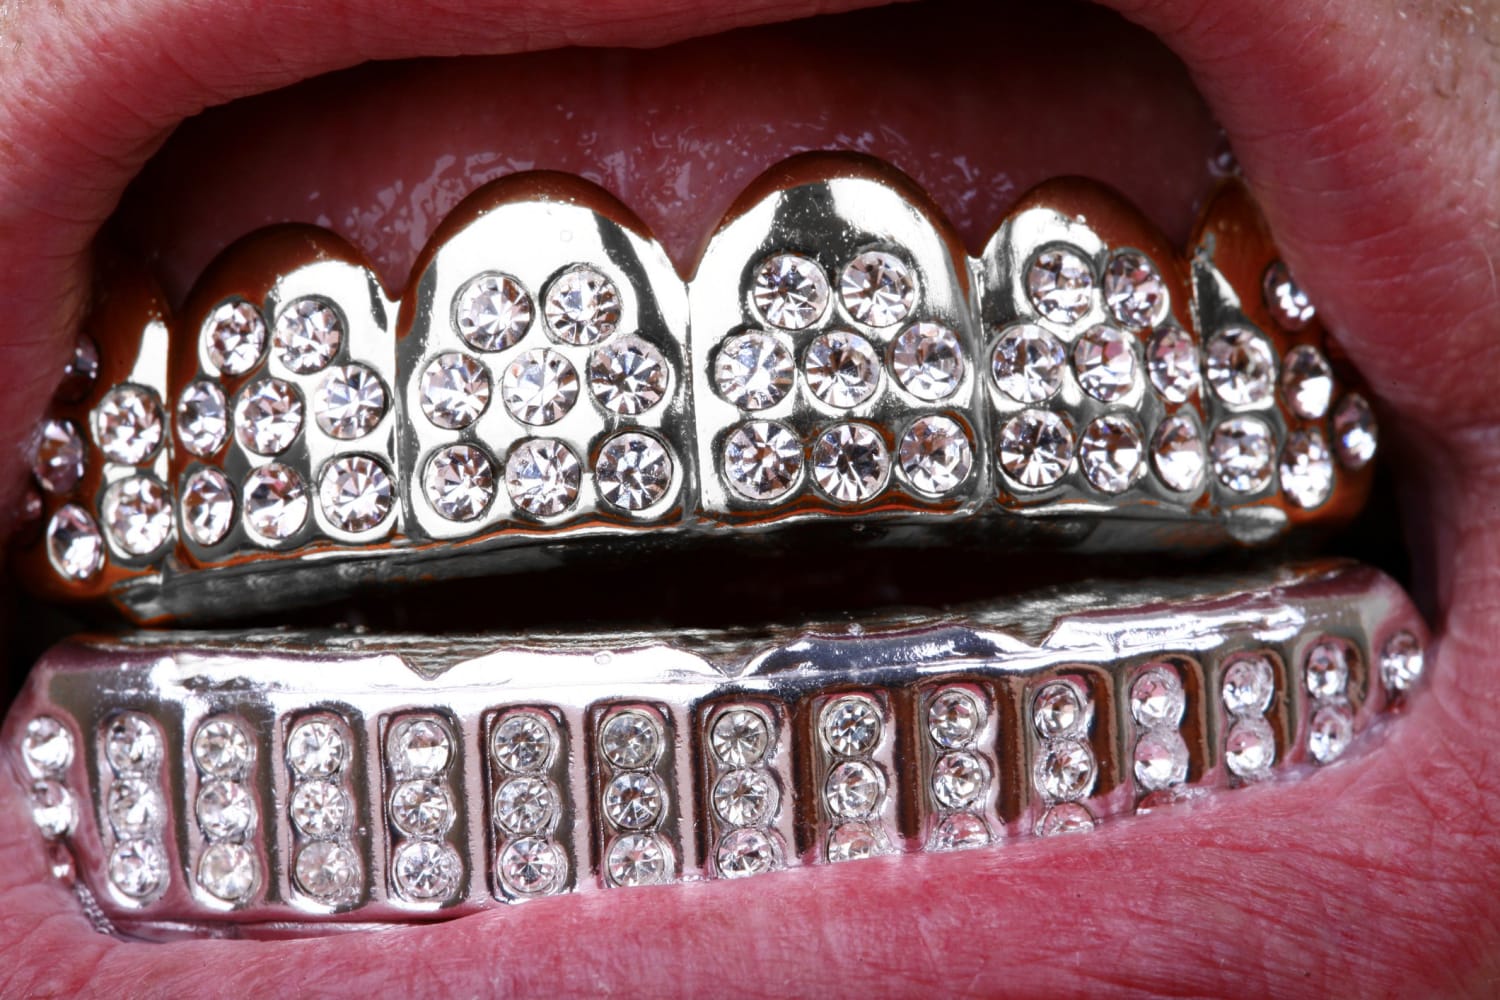 TYPES OF GRILLZ: WHAT ARE THEIR DIFFERENCES? Gold Grillz